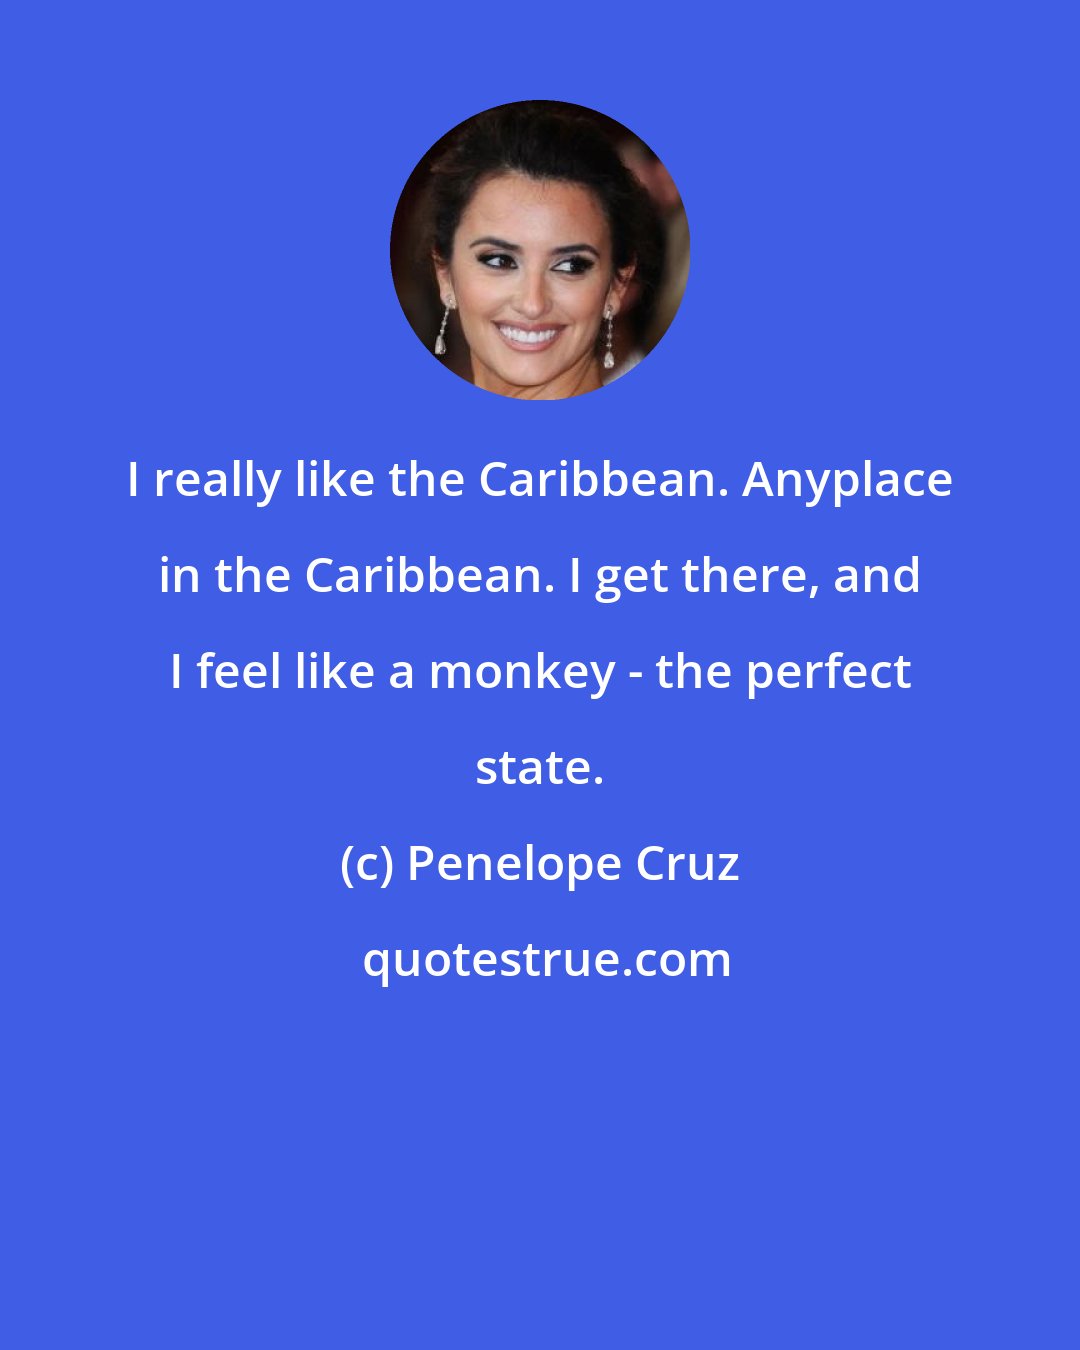 Penelope Cruz: I really like the Caribbean. Anyplace in the Caribbean. I get there, and I feel like a monkey - the perfect state.